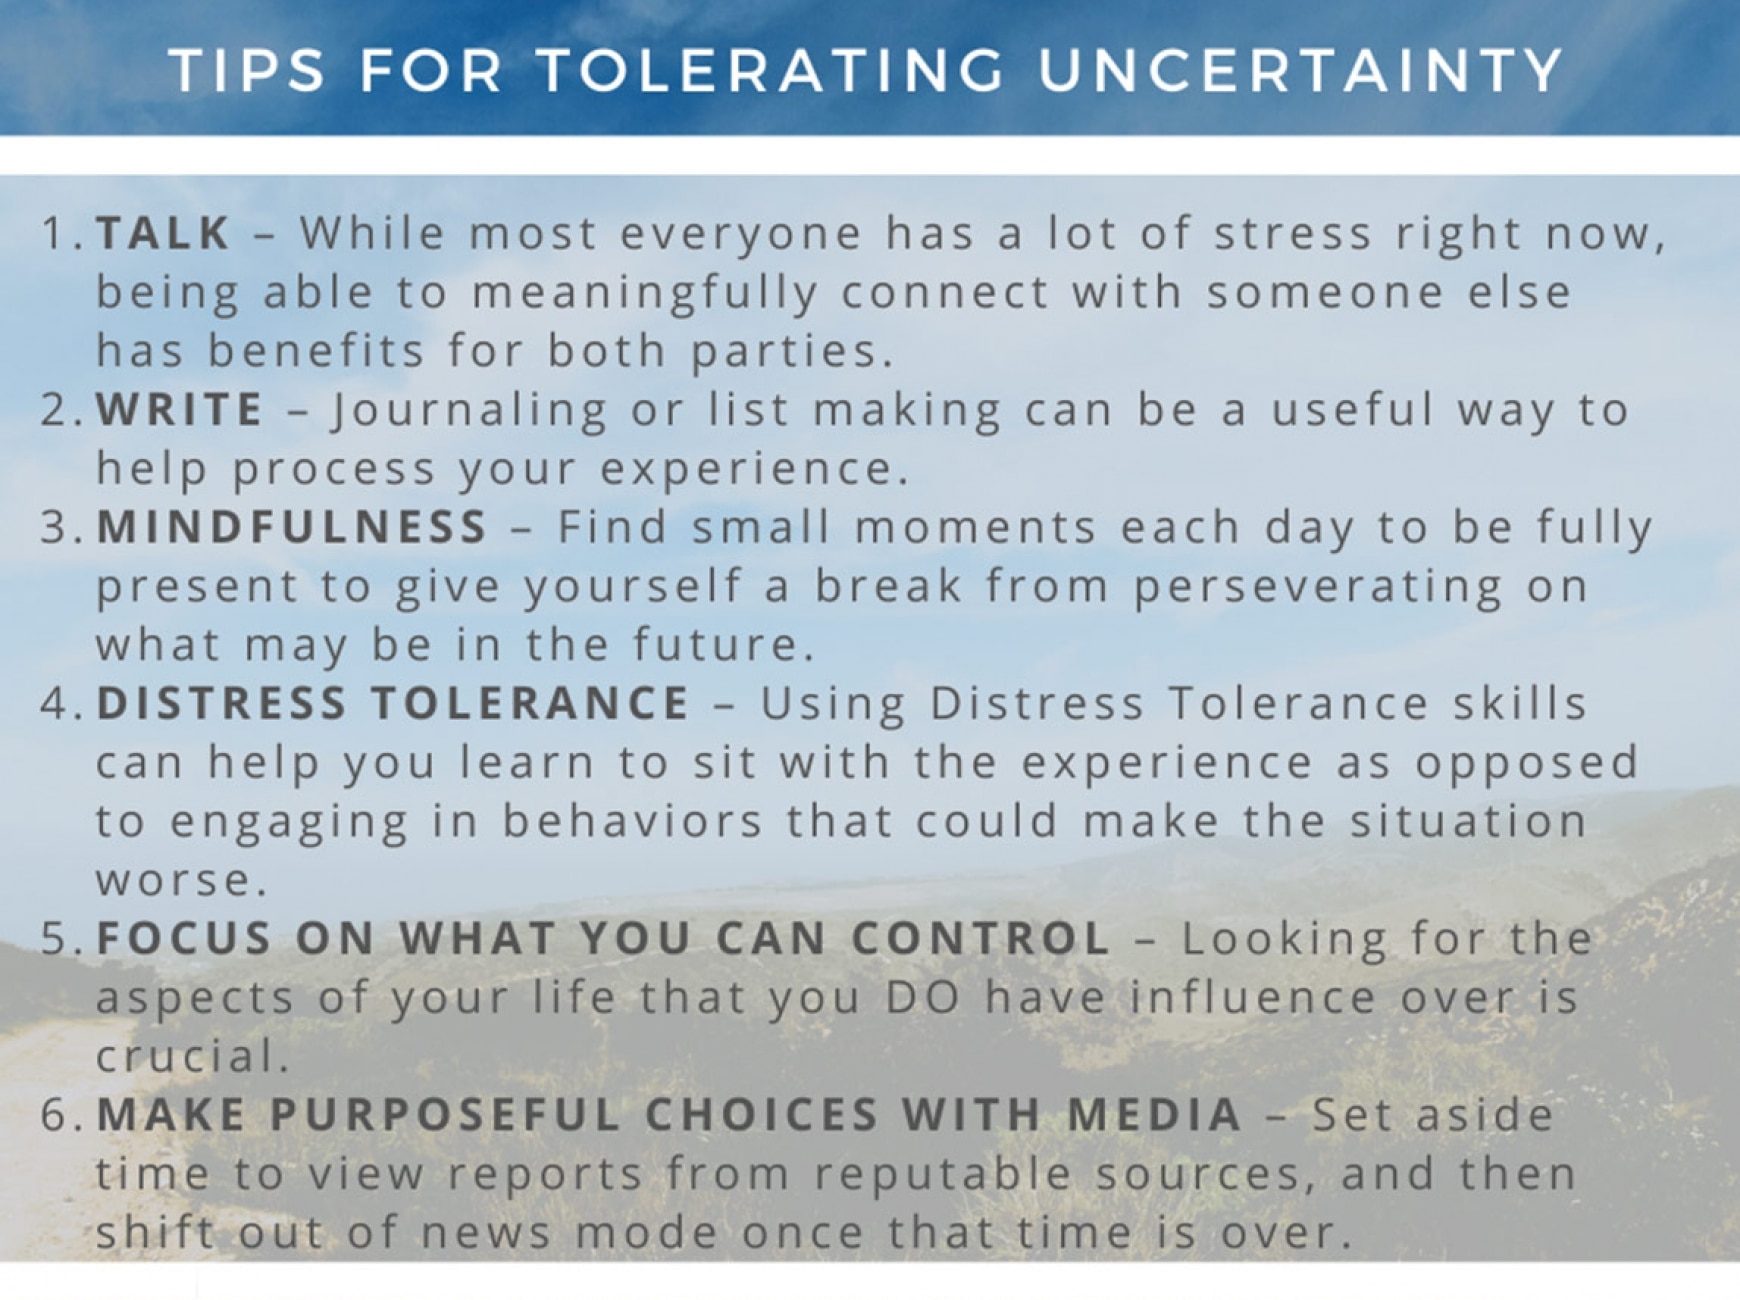 Tolerating Uncertainty - AllHealth Network - Mental Health Counseling ...